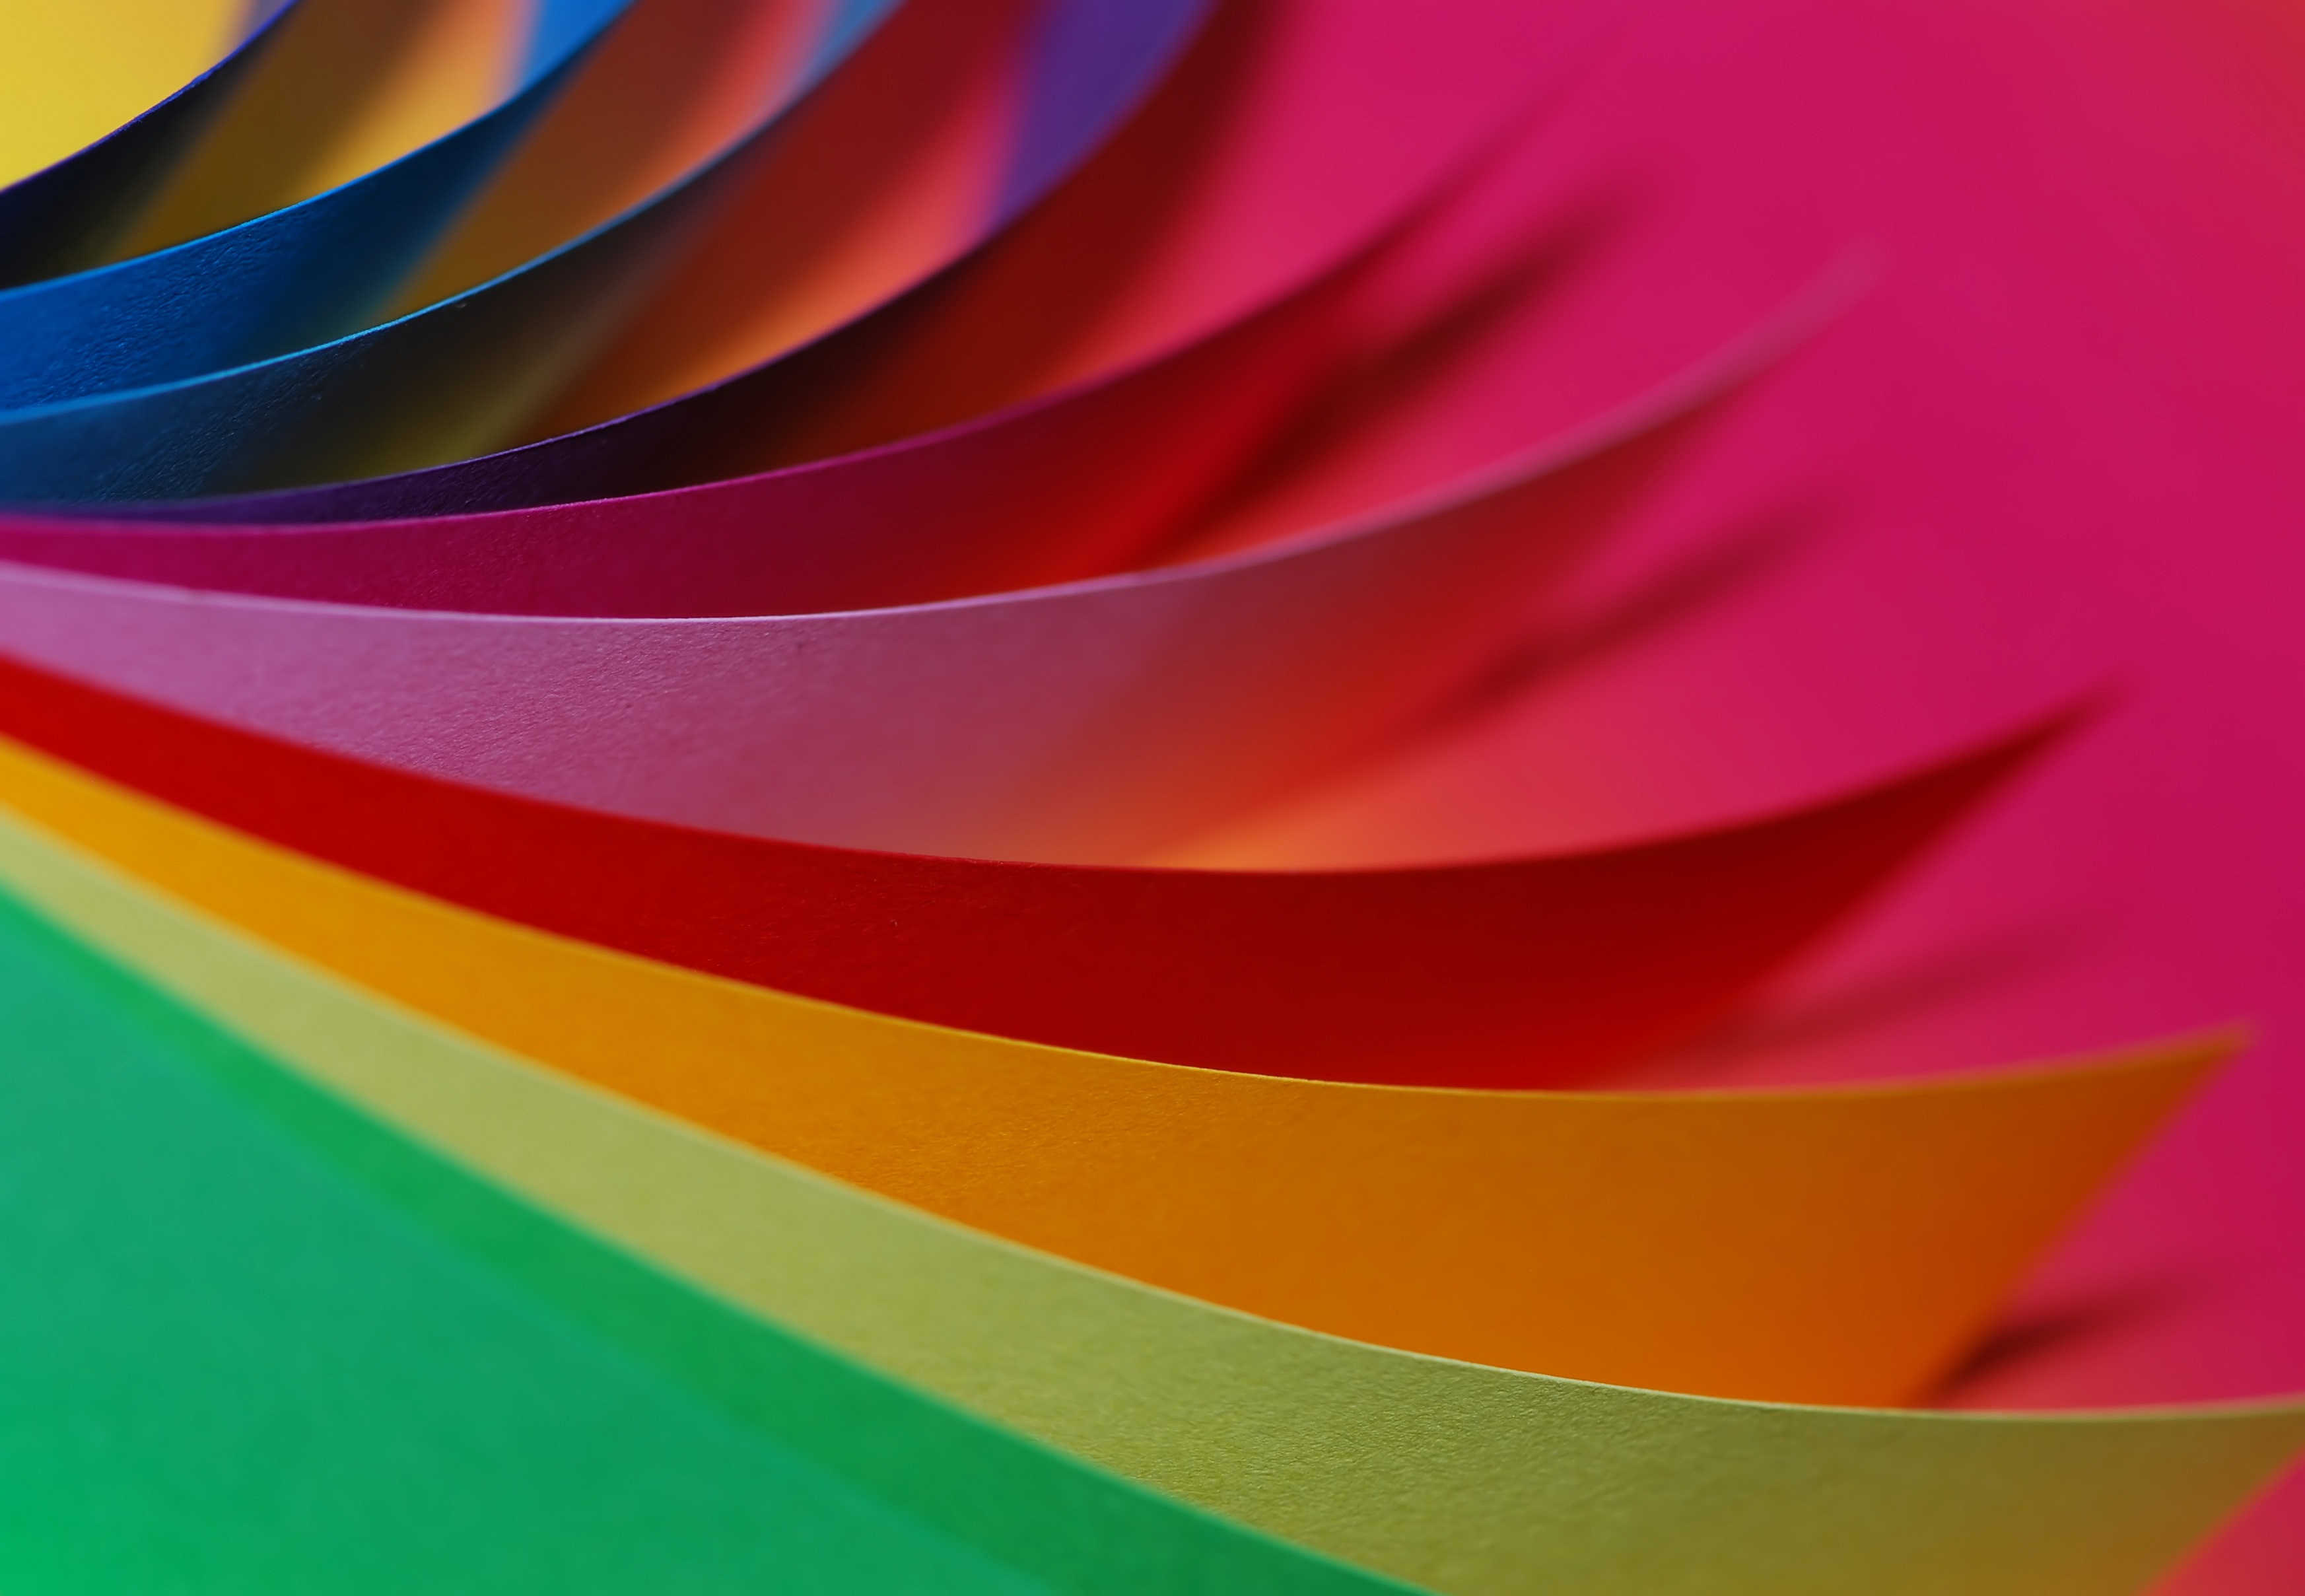 Image of colorful papers